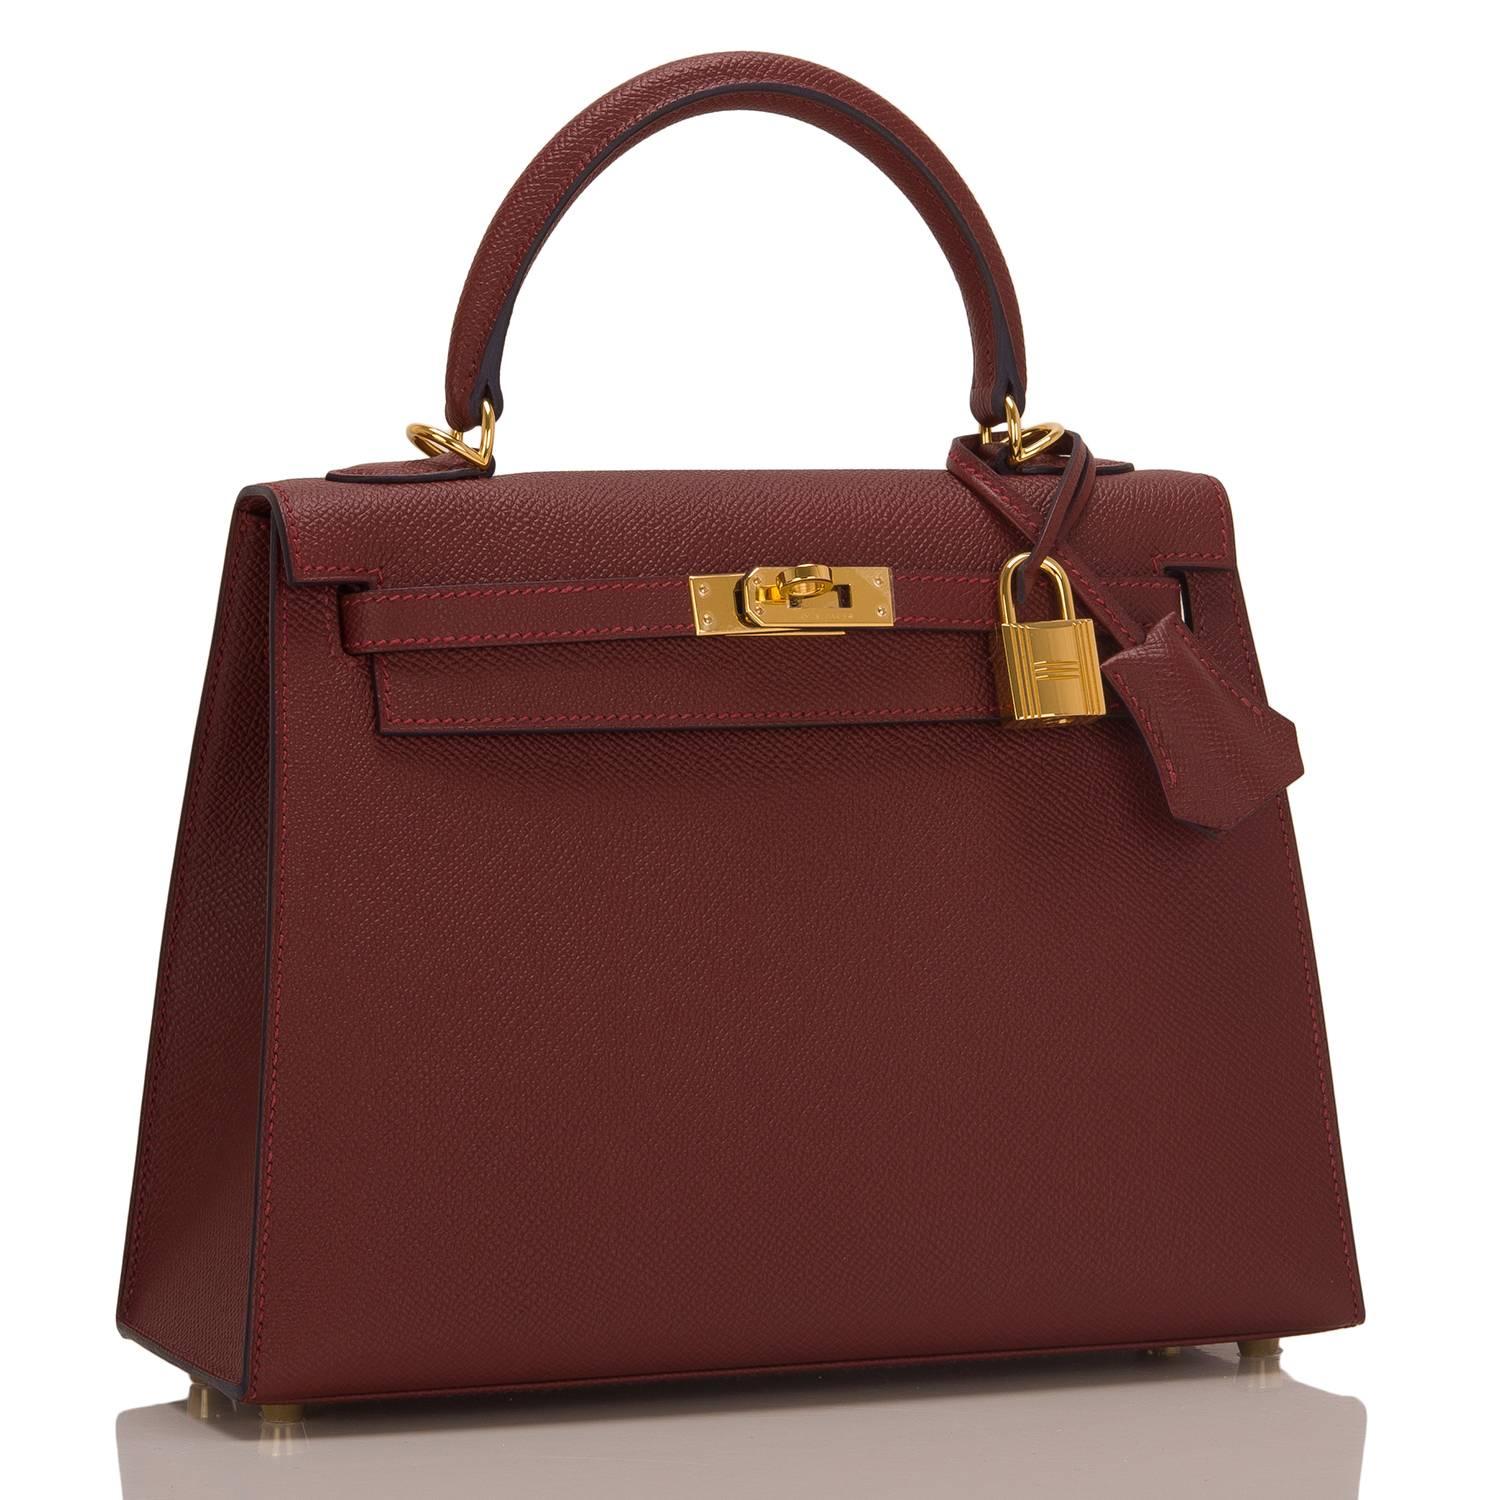 Hermes Rouge H Sellier Kelly 25cm of epsom leather with indigo blue contour and gold hardware.

This limited edition Sellier Kelly has indigo contour (resin), tonal stitching, front toggle closure, a clochette with lock and two keys, single rolled